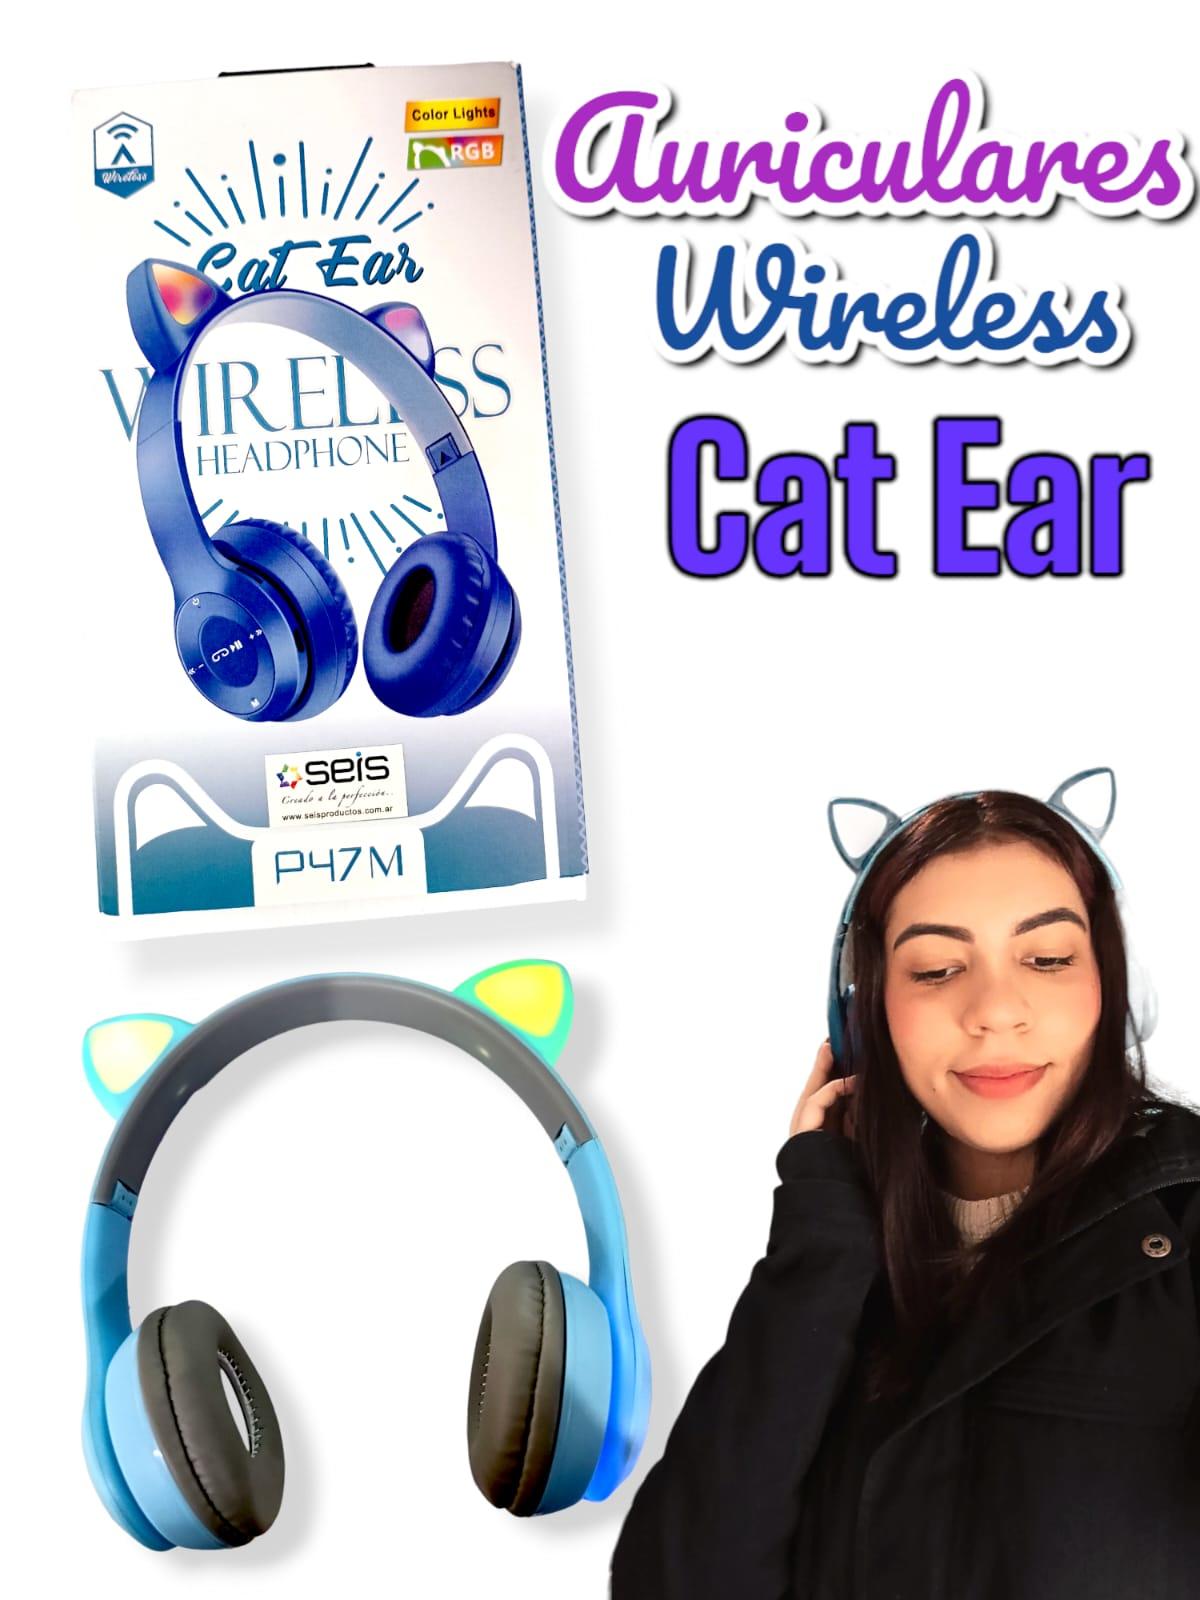 Auriculares Wireless Cat ear P47M